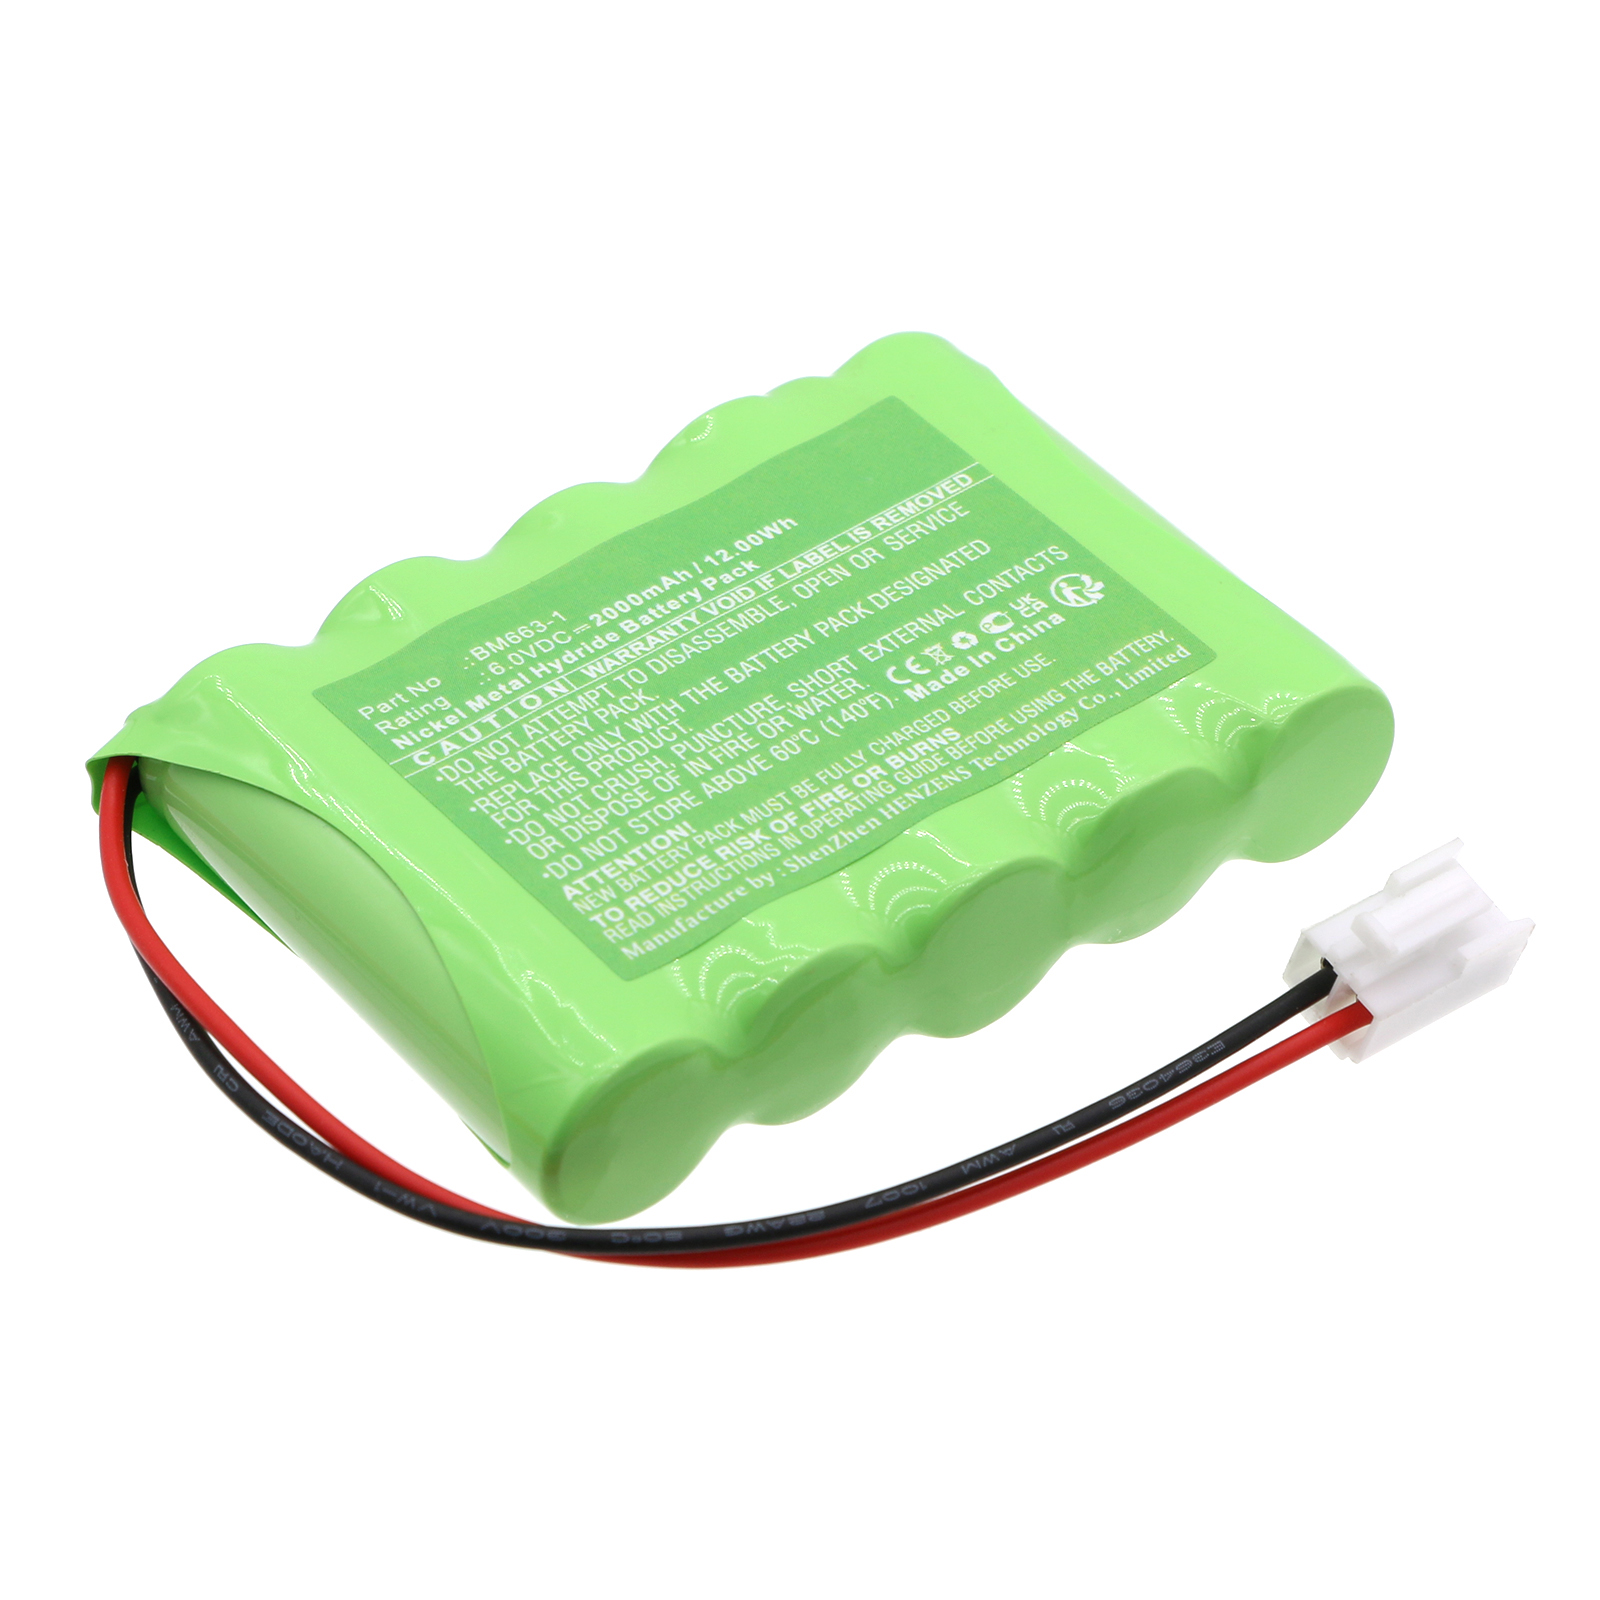 Synergy Digital Medical Battery, Compatible with New Age BM663-1 Medical Battery (Ni-MH, 6V, 2000mAh)